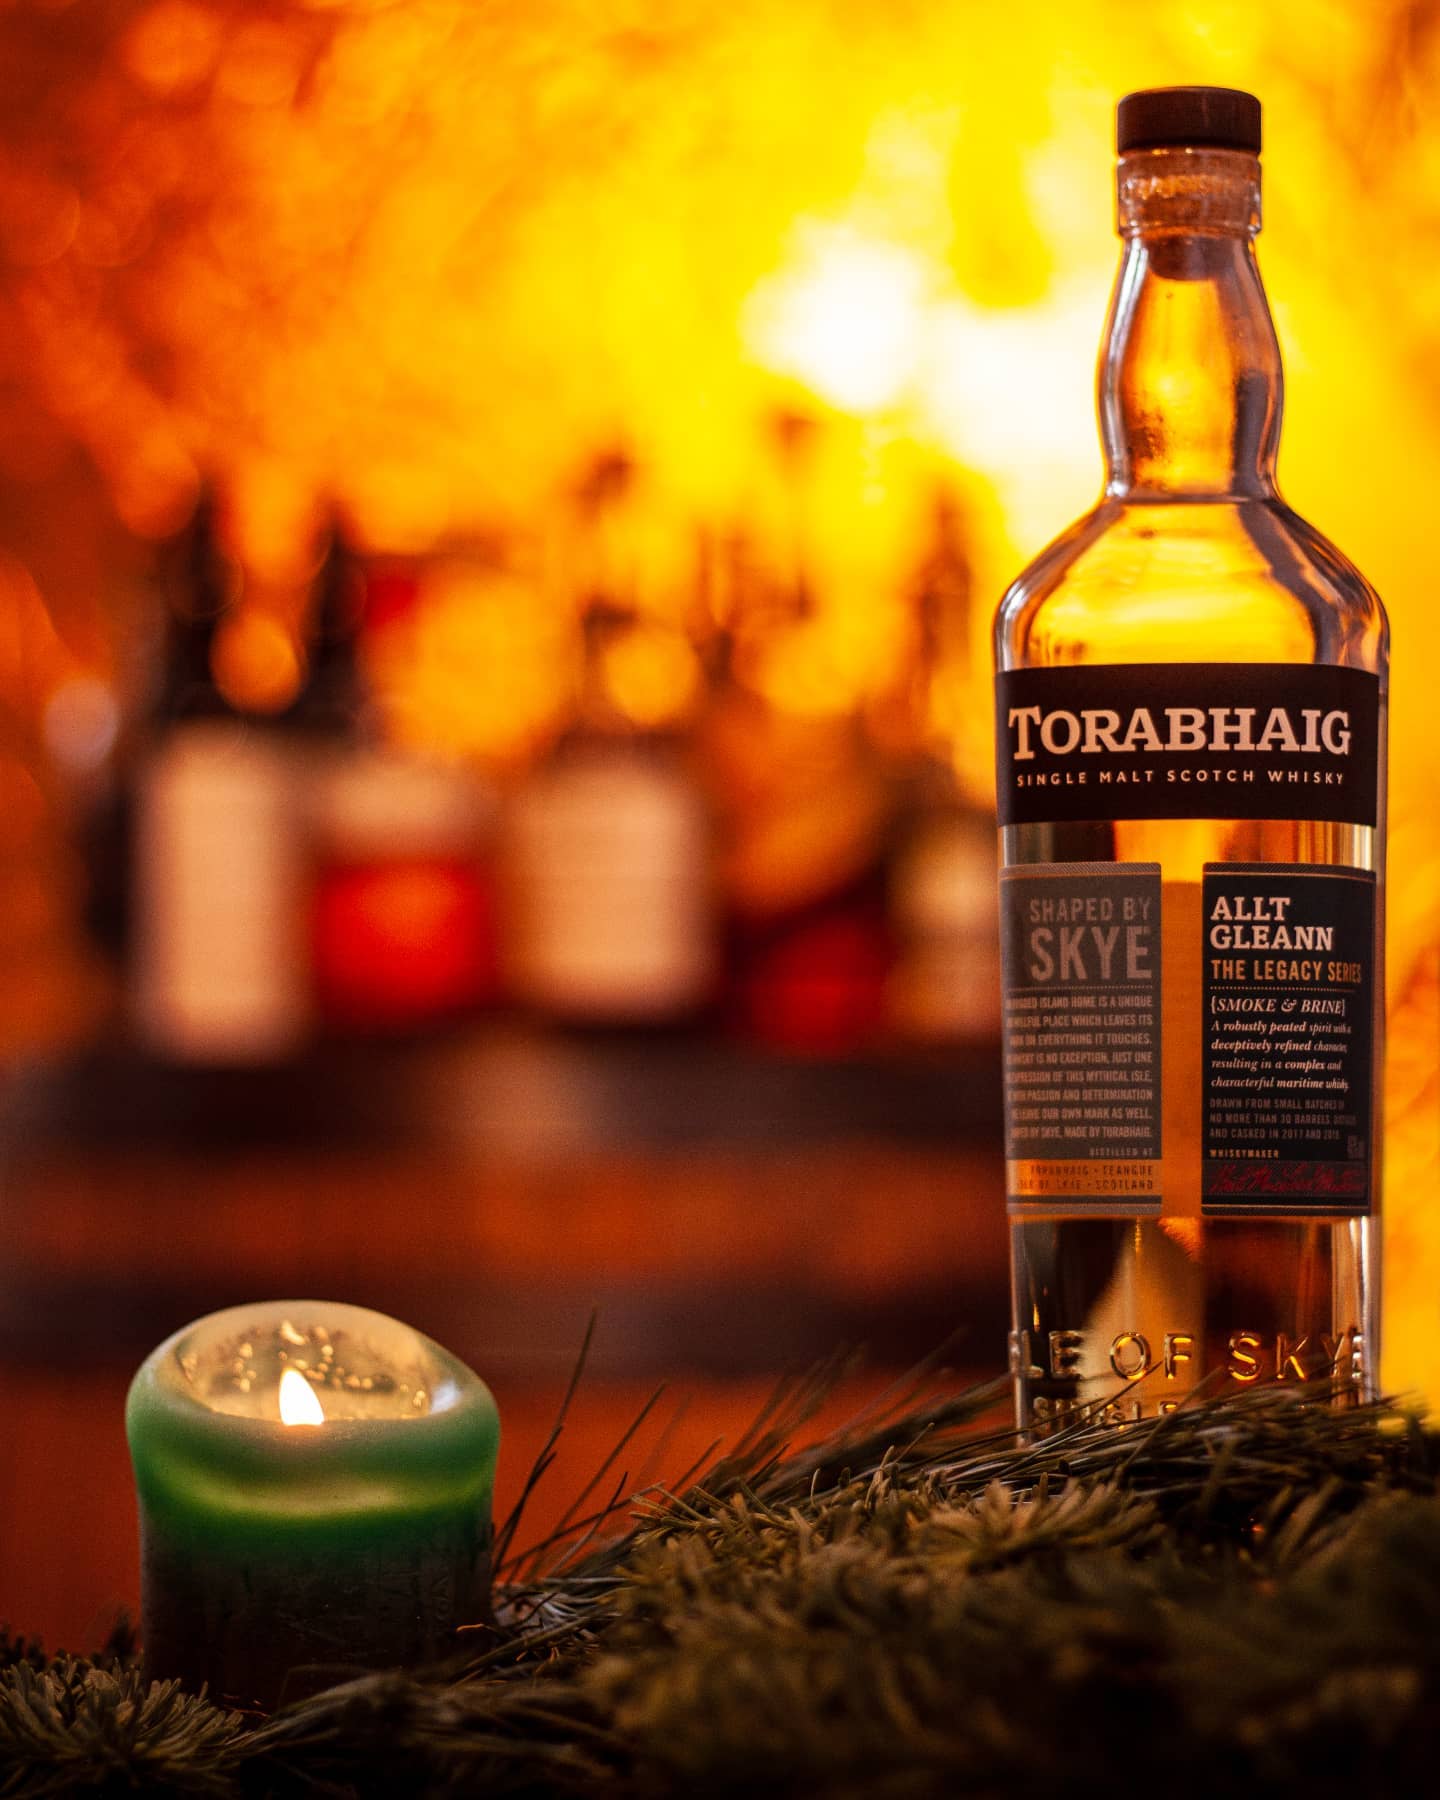 #mcwulf advent calendar 2021 - window no.24

[unpaid ad]

Window no. 24 - and a happy, merry (and belated) Christmas to all of you! The final window offers @torabhaig_distillery 's Allt Gleann, the inaugural series' second release and an absolute stunner at that age (bottled at 46% ABV).

📜 tasting notes:

👃
Sweet to savoury peaty, salt and vanilla with citrus, rubber, machine oil and hints of metal / iron. It's a perfect balance between maritime freshness and industrial rawness, with citrus and vanilla on top (what a summary, I know...)

👅
Peat and ashy smoke, liquorice, cereal starch and that machine oil rawness again, way less citrus flavours than with the nose - but more malty sweetness to it.

🏁
Delicate and fresh, ashy and peaty as well as brine, with liquorice and peppery herbs. Smooth and spicy at the same time, solid balance. Almost no metal / industrial flavours left (a pity though) - but more a memory of wet stone / streets... Any idea what I mean?

More info to be found here: www.mcwulf.de (in German).

How about you folks - do you feel me when I talk about industrial rawness, wet stones and soaked asphalt of island streets? 
I'm not turning crazy, but that dram really reminds me of the odeurs on a mixed weather day on Skye when the streets, wet from maritime rainfalls, get heated up by the overtaking sun (rare occasions, I know).😉😅

Share your thoughts or declare me crazy in the comments - and please do enjoy your dramming - cheers!🕯️🥃🎄

#whisky #whiskey #islandwhisky #scottishwhisky #scotch #slainte #singlemalt #scottishisles #whiskylover #whiskygram #instawhisky #instadram #torabhaig #torabhaigdistillery #isleofskye #tastingnotes #dramoftheday #hebrides #innerhebrides #dramantics #dramtastic #picoftheday #legacyseries #alltgleann #secondrelease #inaugural #oldmanofstorr #whiskyadvent #hofsaale